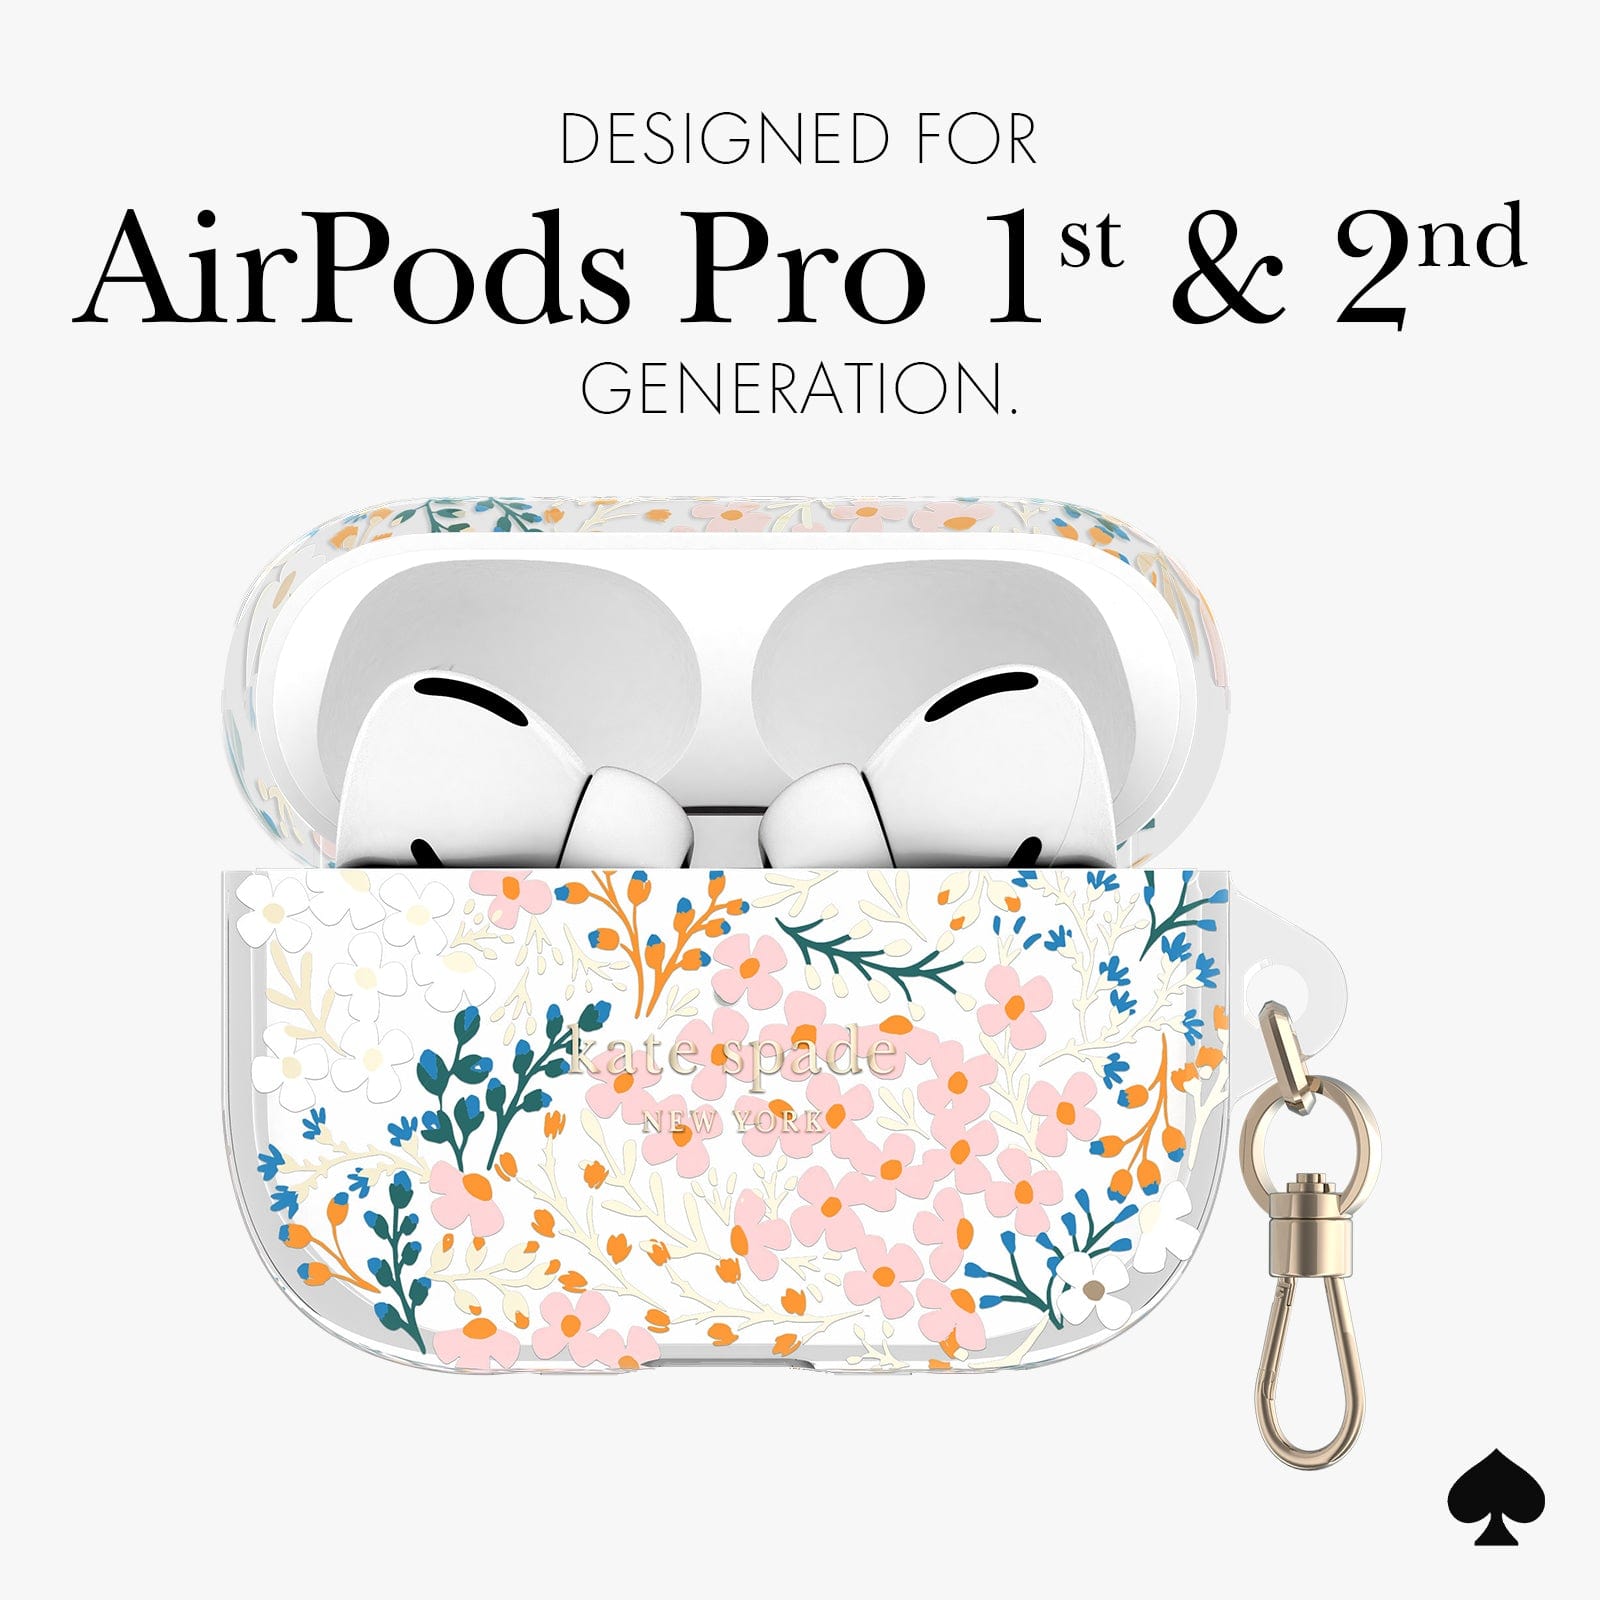 DESIGNED FOR AIRPODS PRO 1ST AND 2ND GENERATION